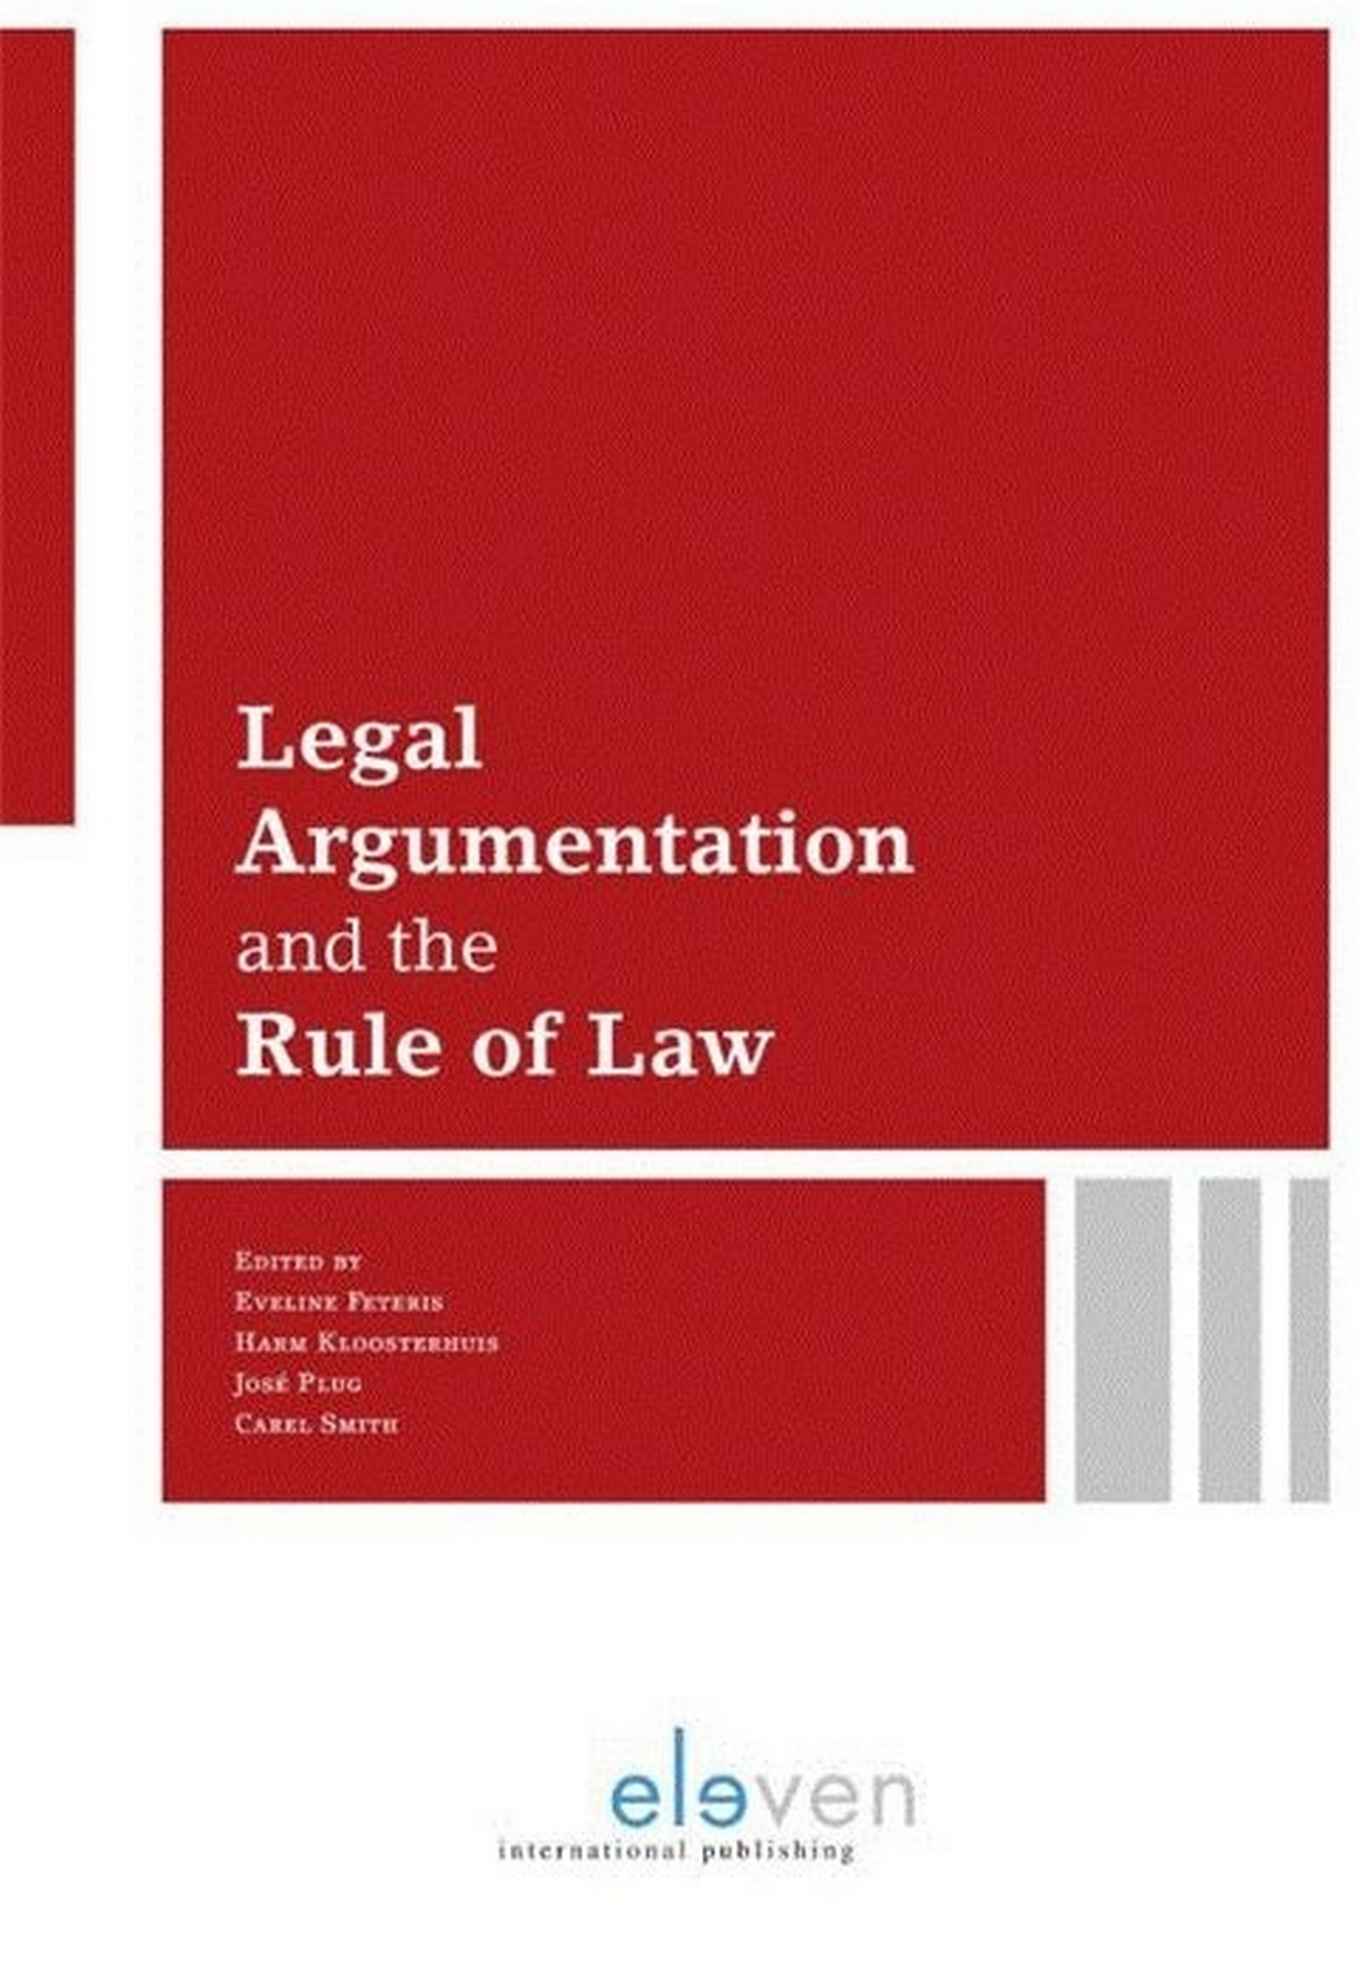 Kaft Legal Argumentation and the Rule of Law